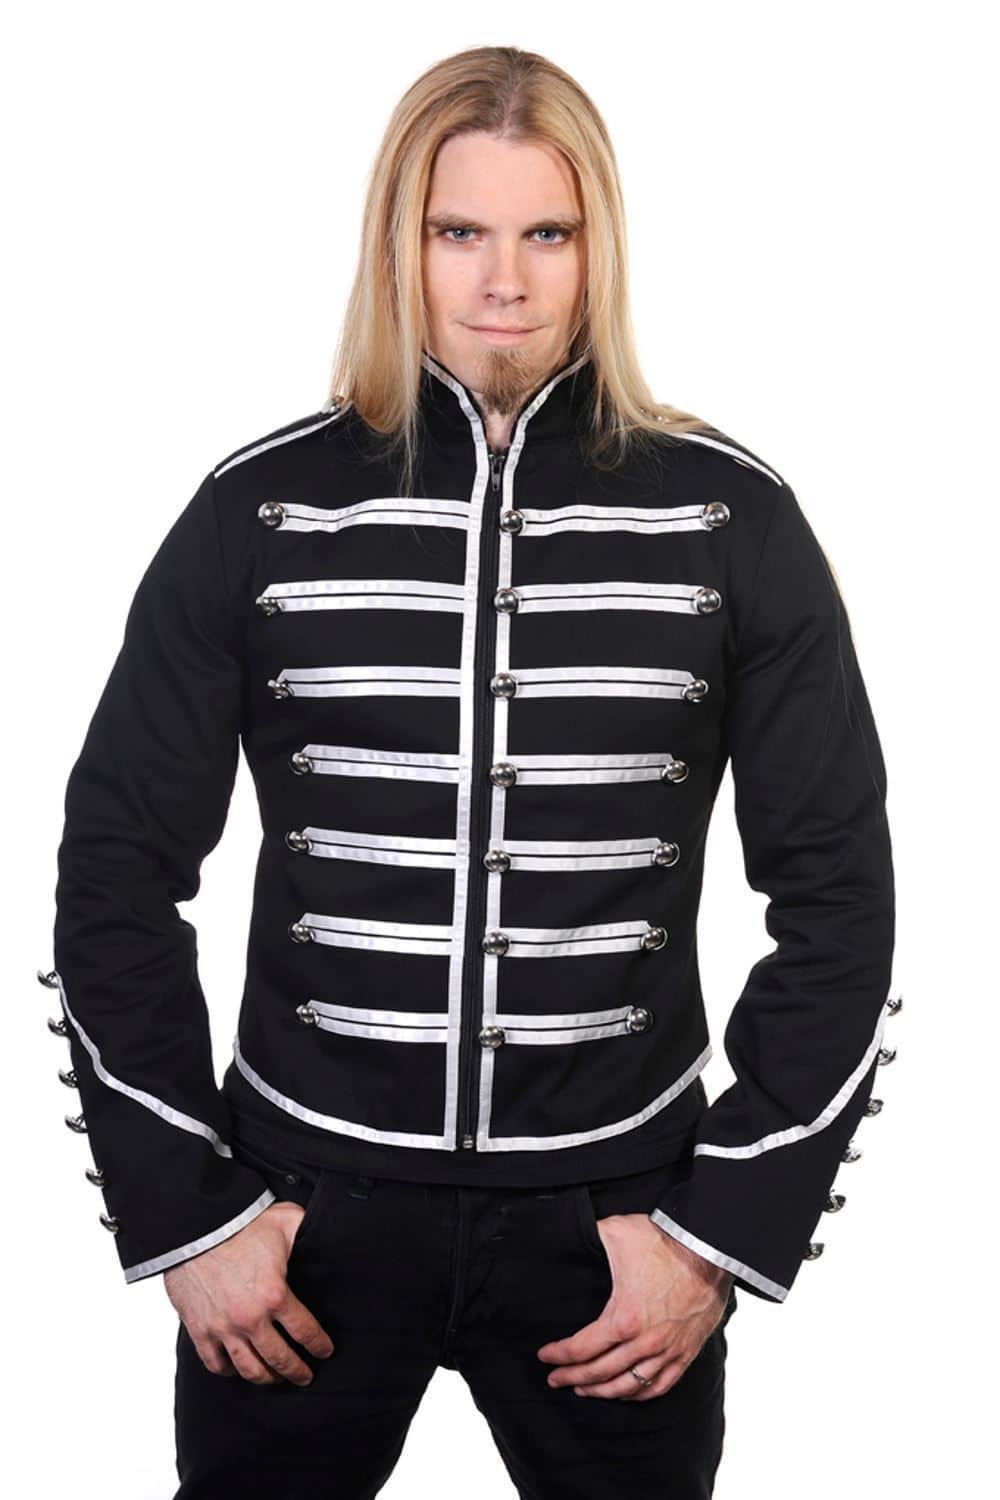 Men's Jacket Military Drummer Parade Marching Band Stage Live Rock Emo  Punk Goth